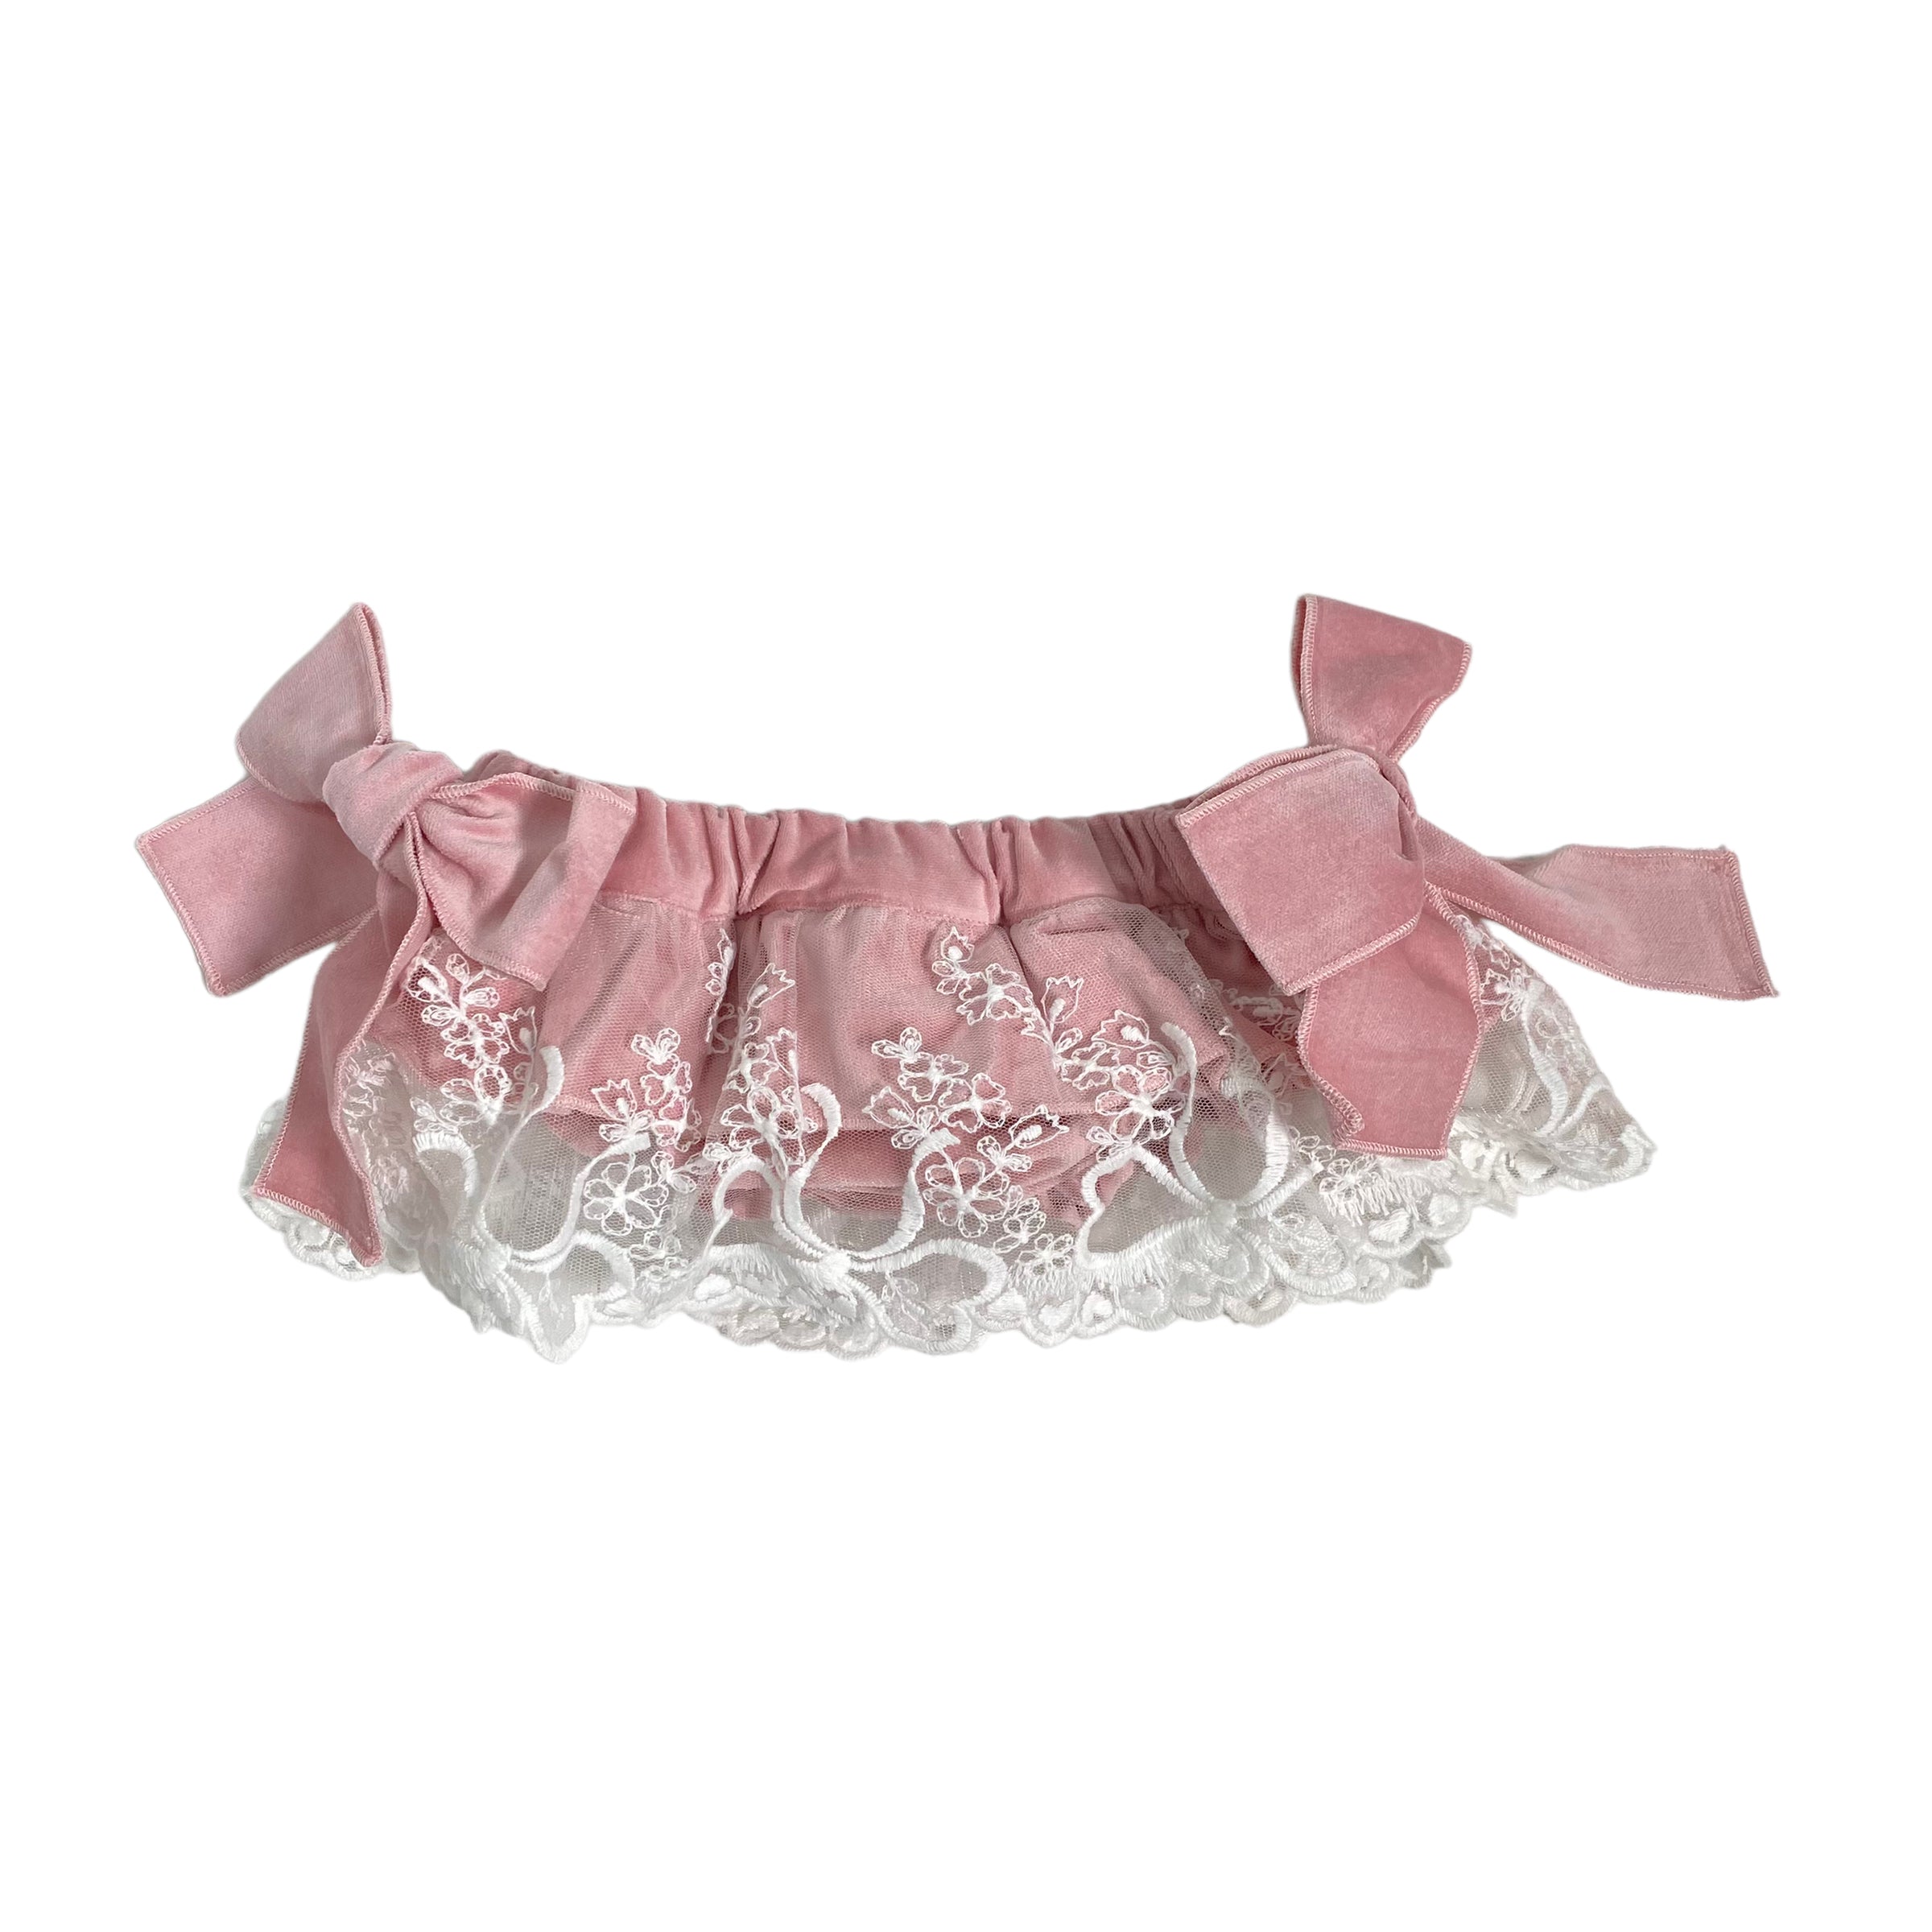 Culotte In Velluto Con Pizzo Rosa Neonata PHY CLOTHING 22519 - PHY CLOTHING - LuxuryKids